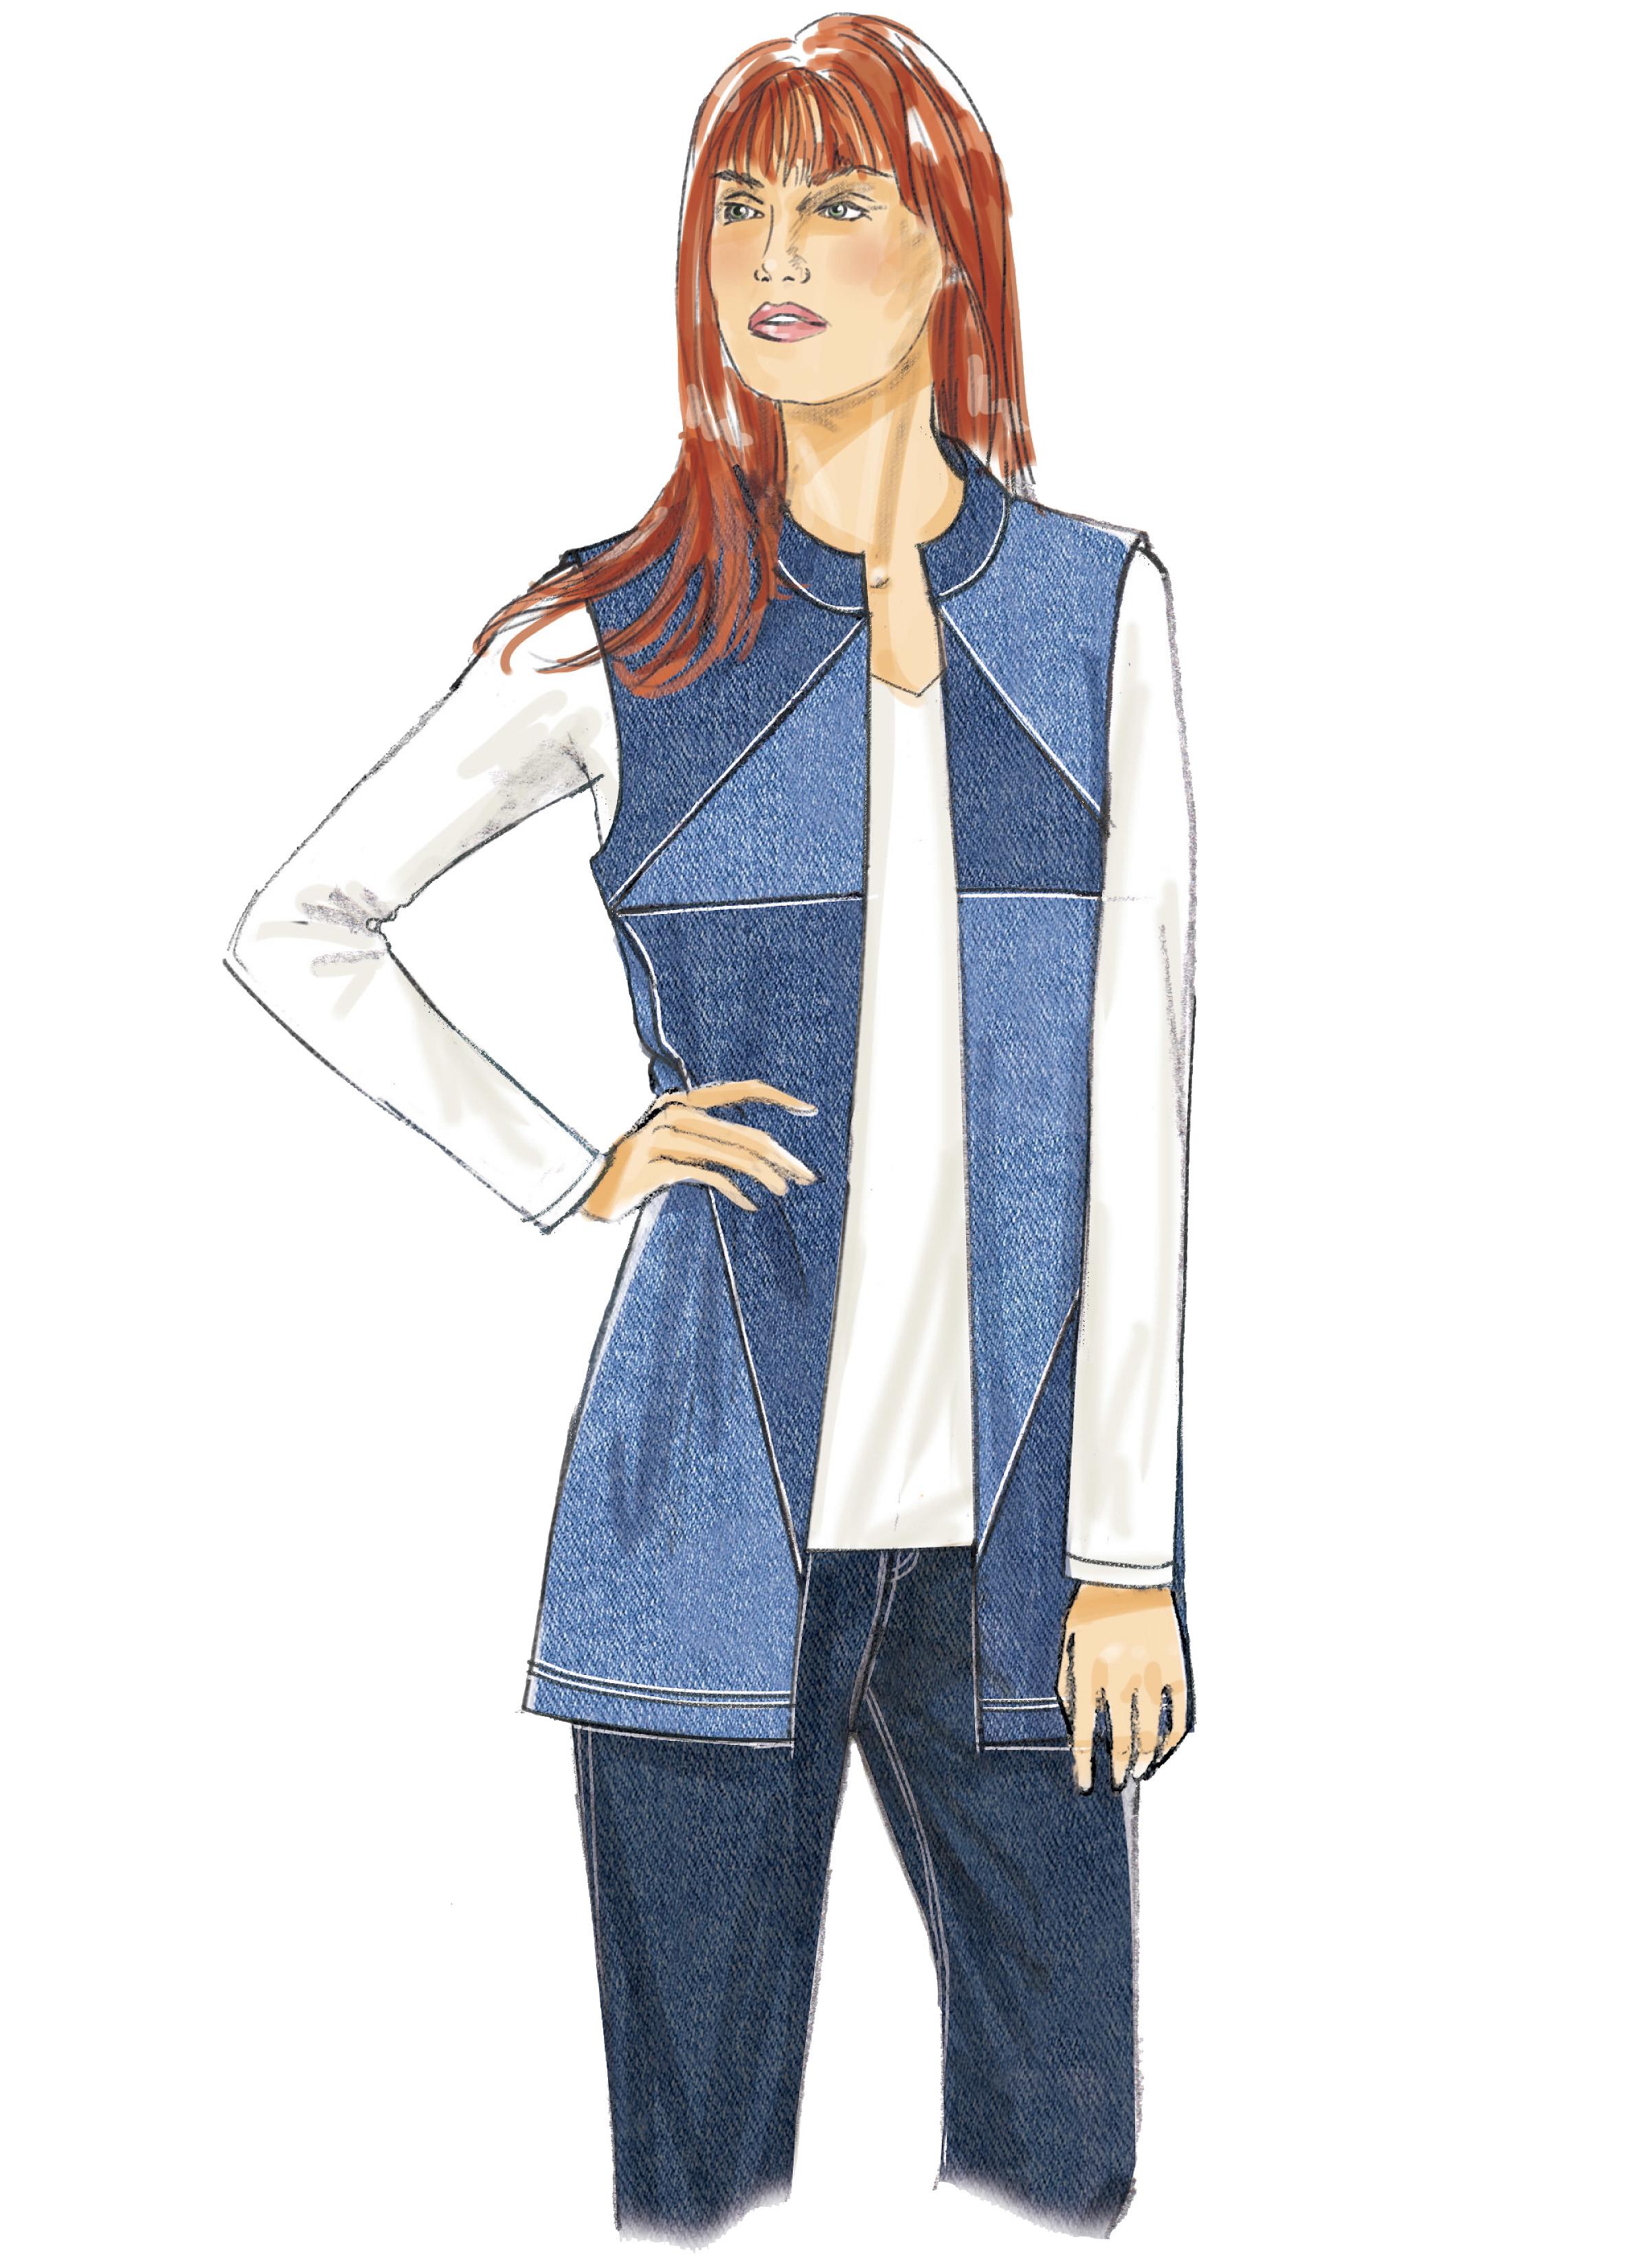 Butterick B6496 Misses' Jackets and Vests with Contrast and Seam Variations